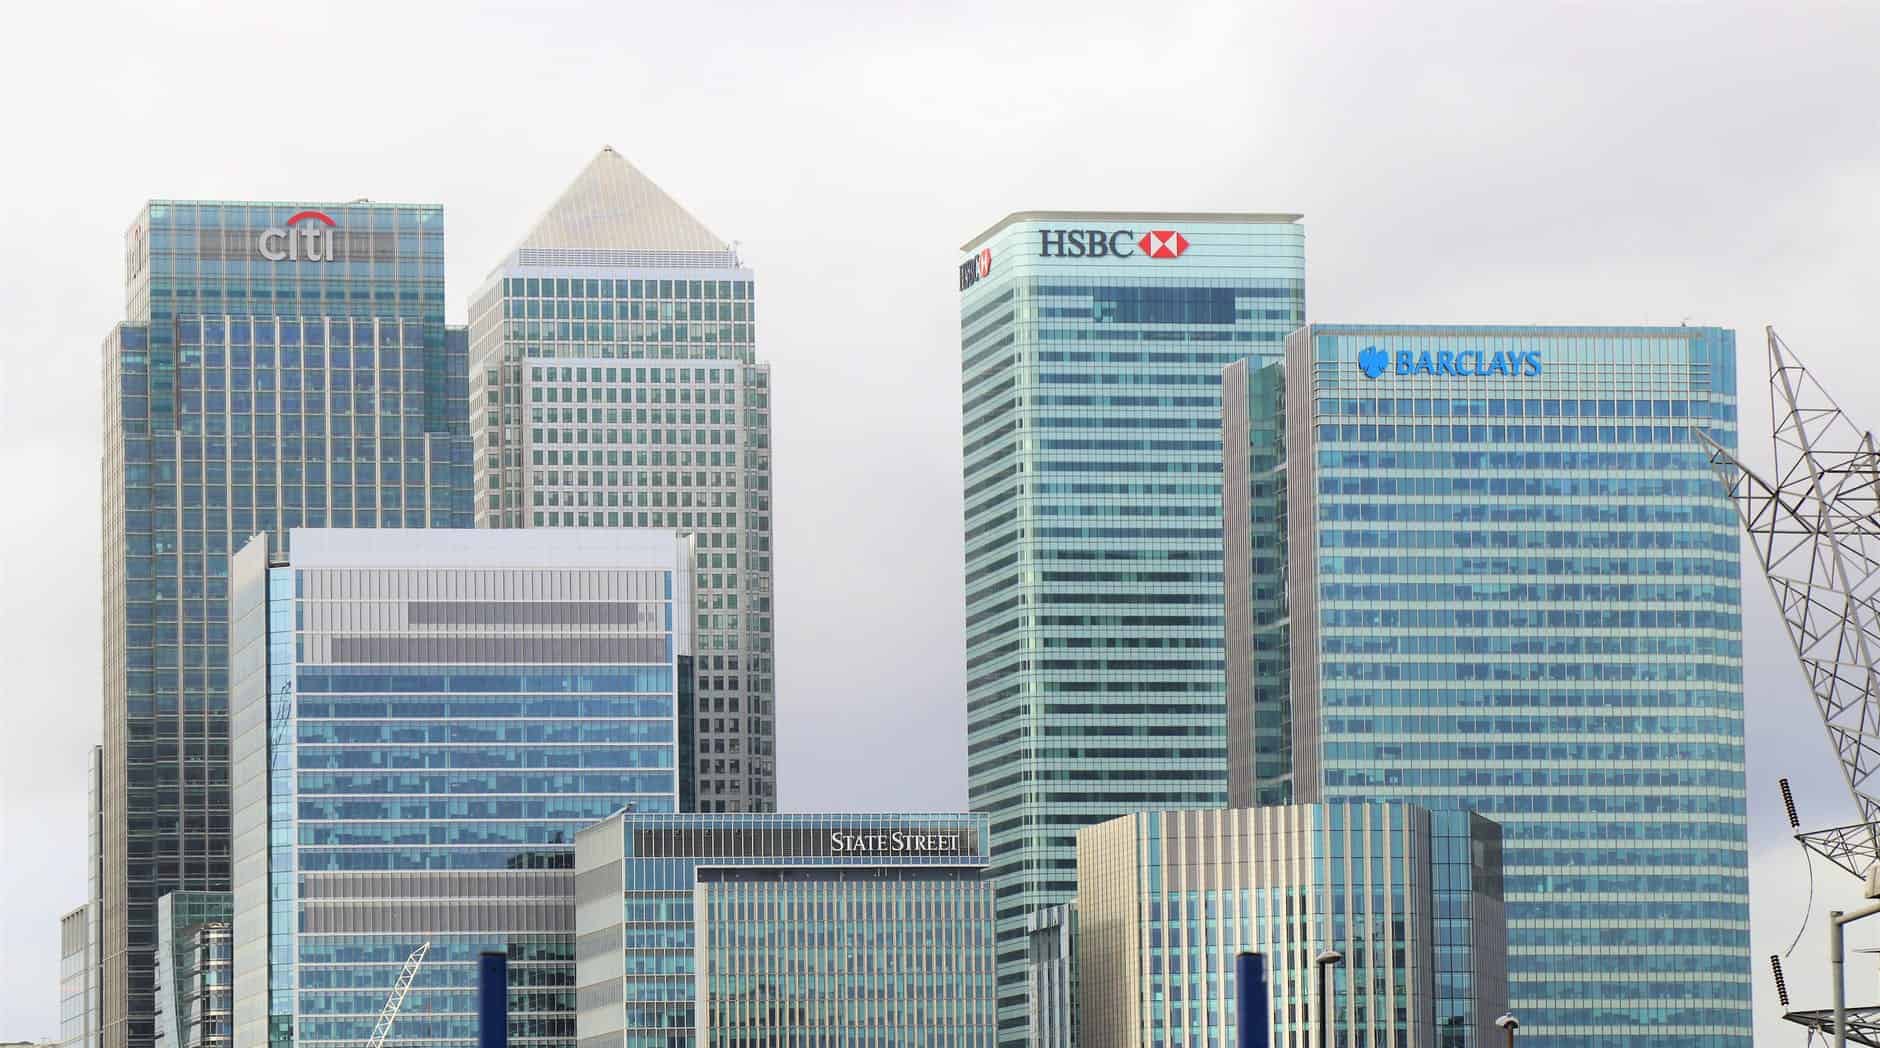 Four major British bank buildings, Citi, State Street, HSBC and Barclays.